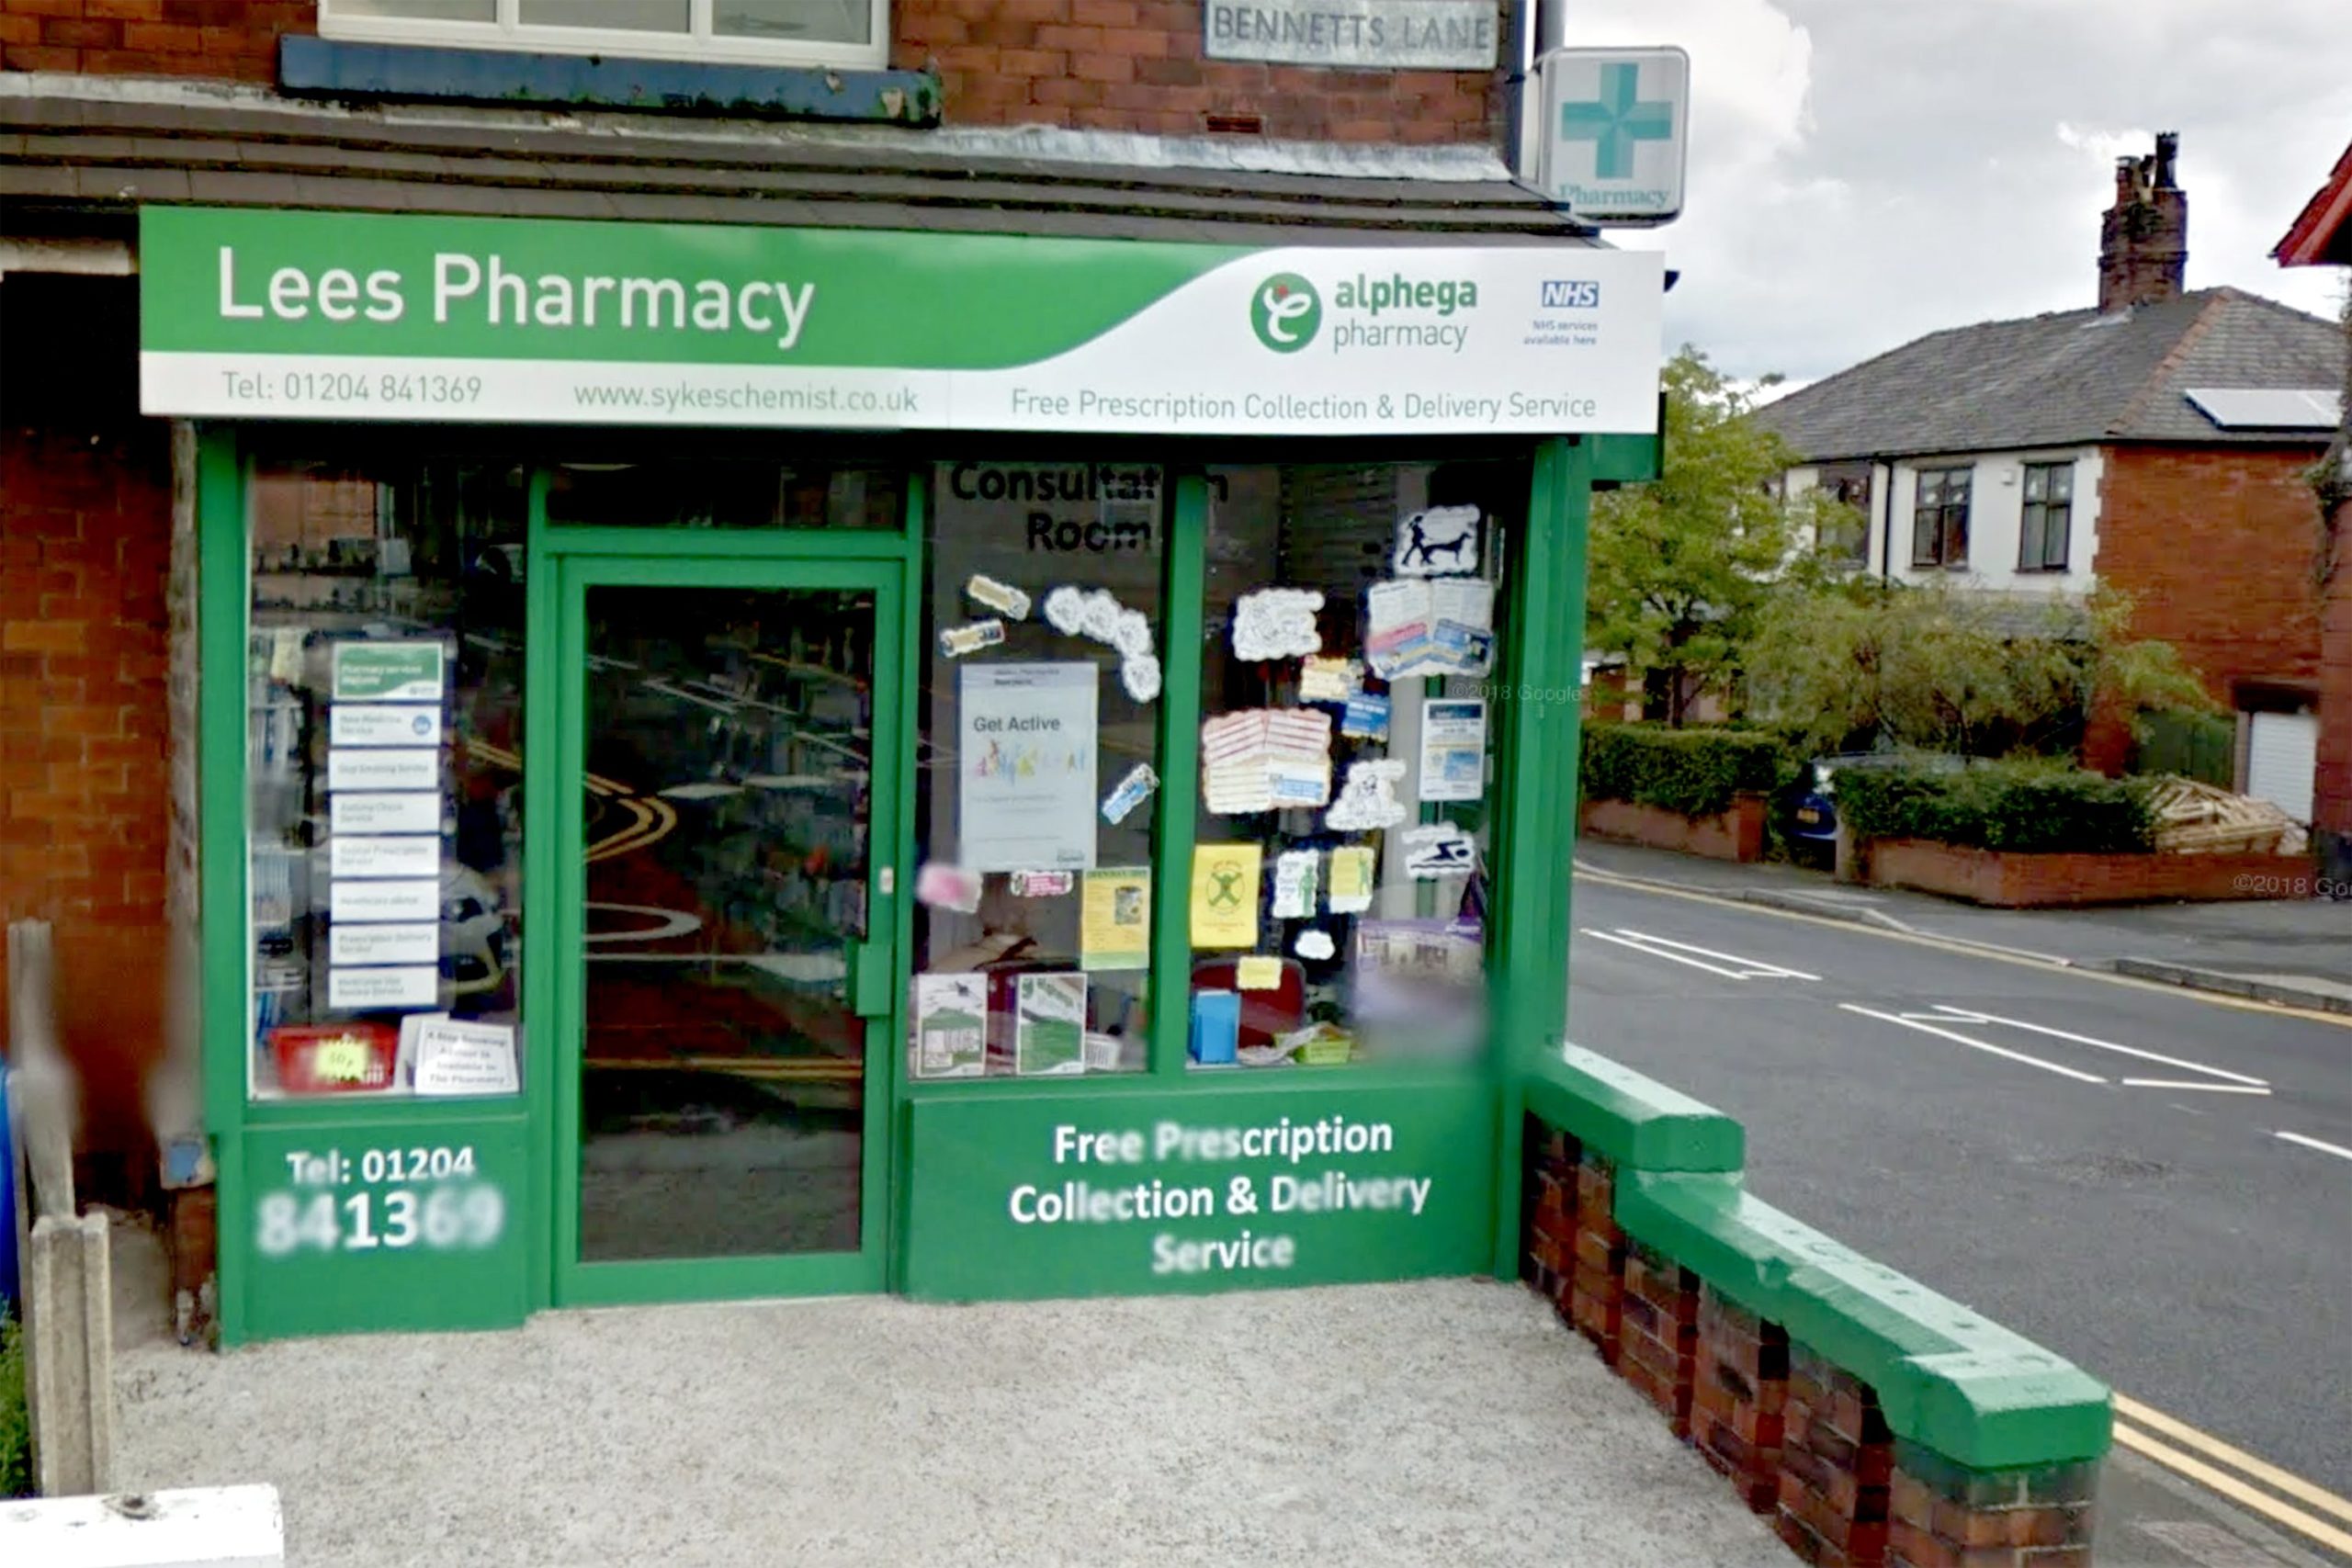 Bolton pharmacy shuts after almost a century following funding cuts, owner  says - The Pharmaceutical Journal